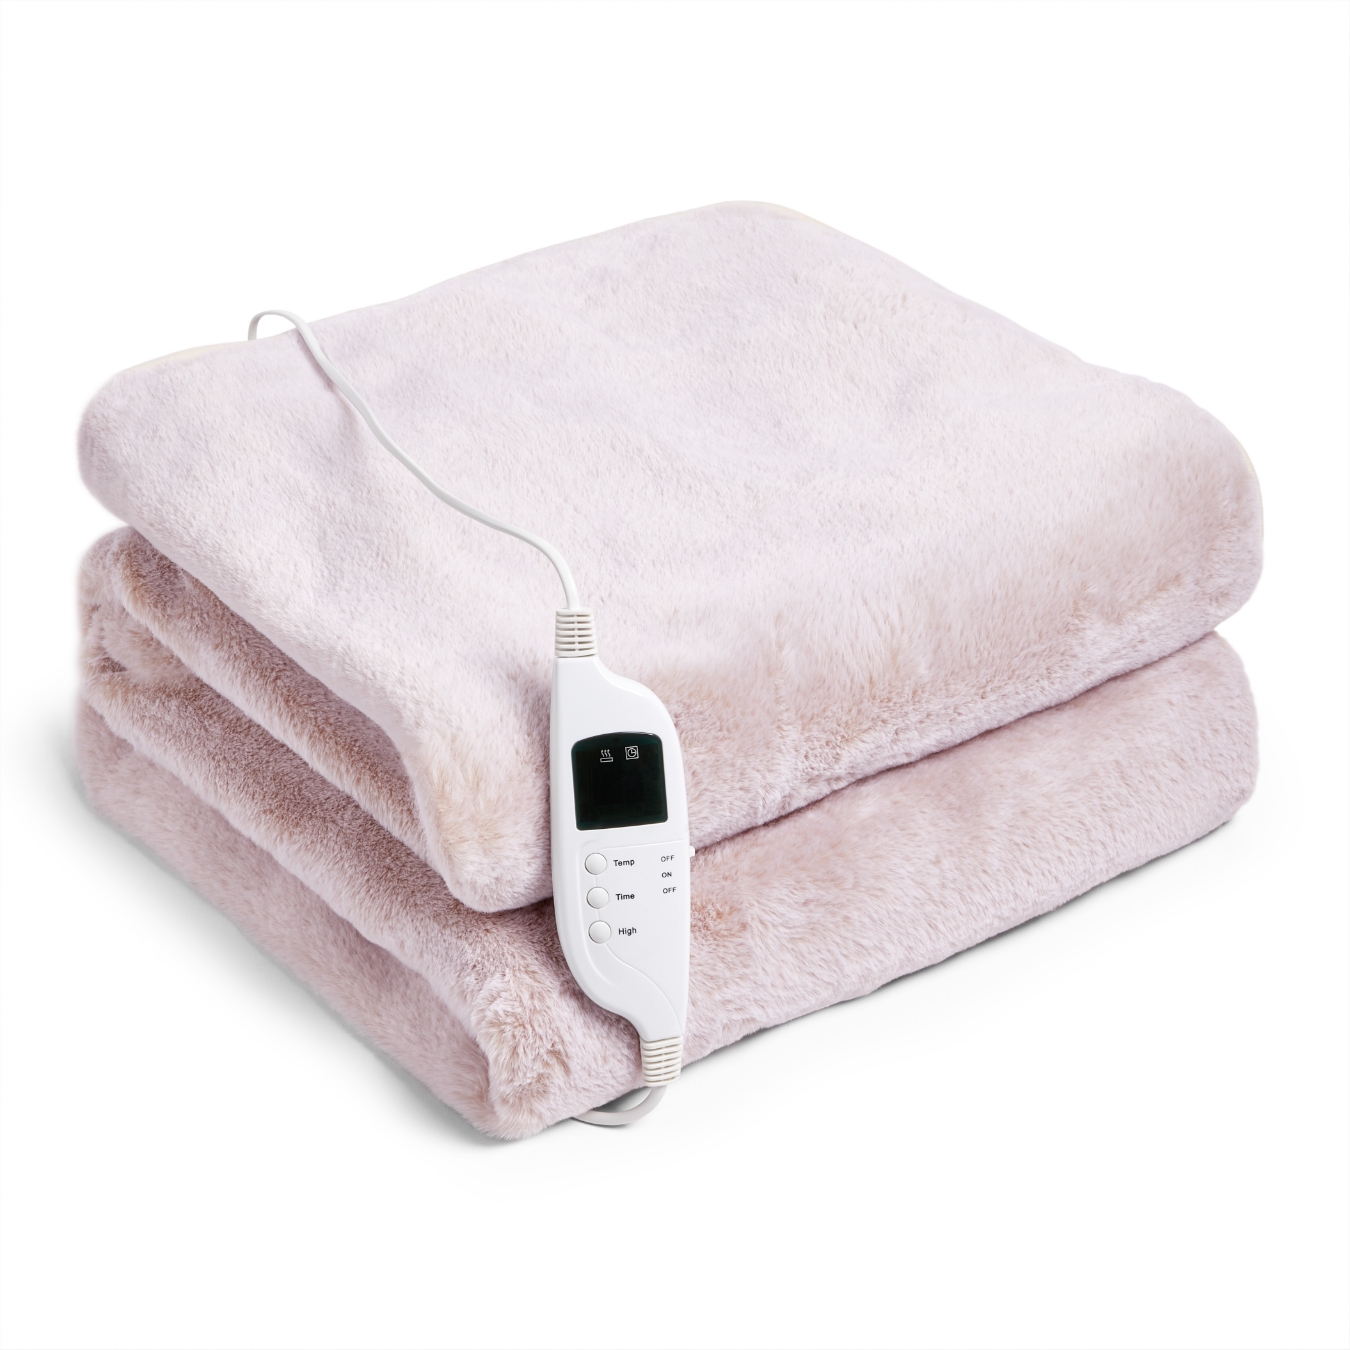 An image of Silentnight Luxury Large Faux Fur Heated Throw